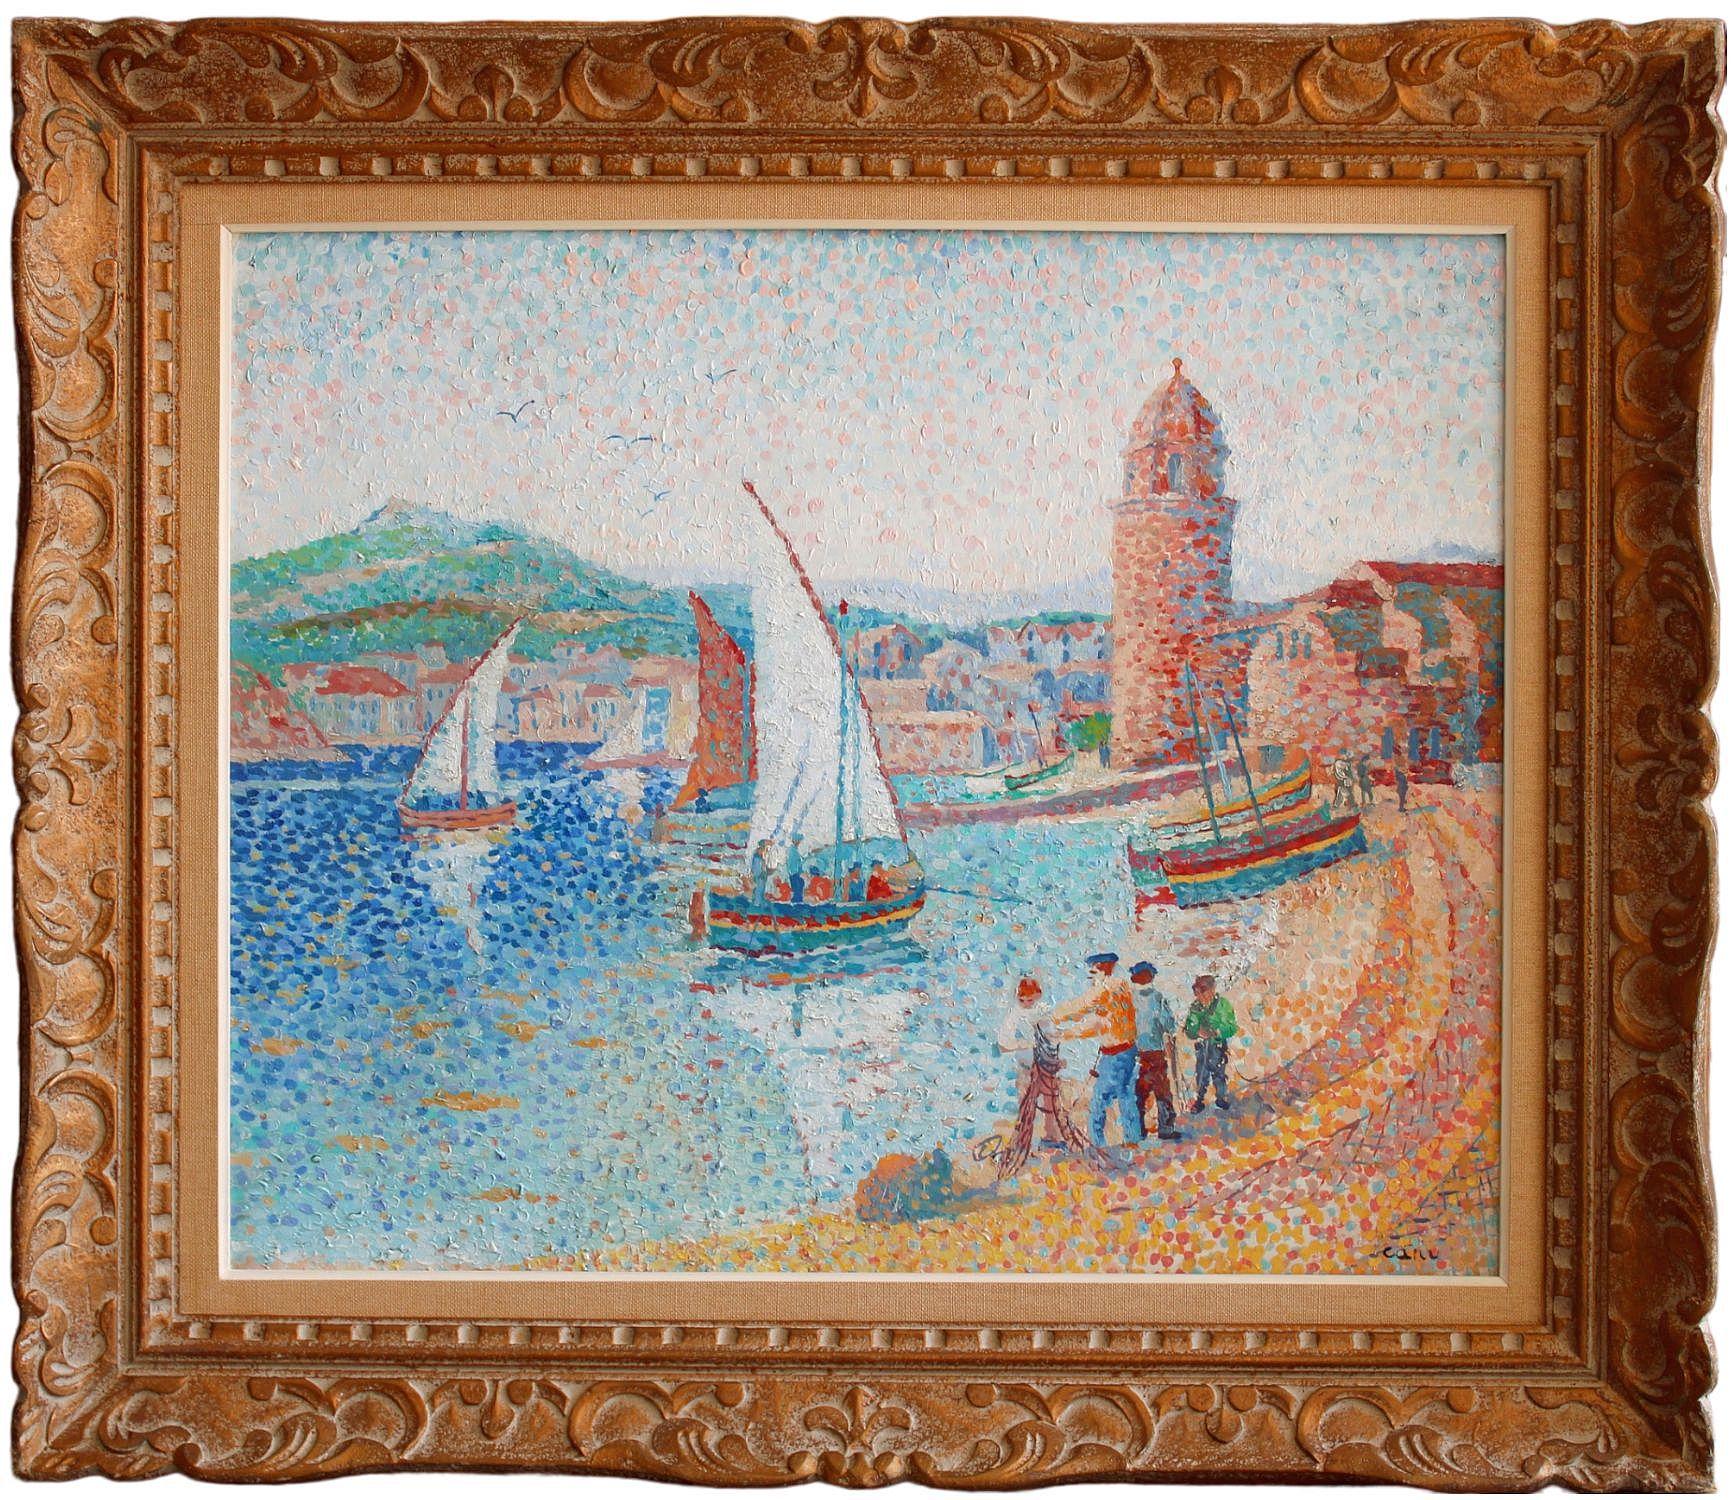 Collioure. Oil on canvas 50, 5 x 61 cm - Painting by Canu Yvonne